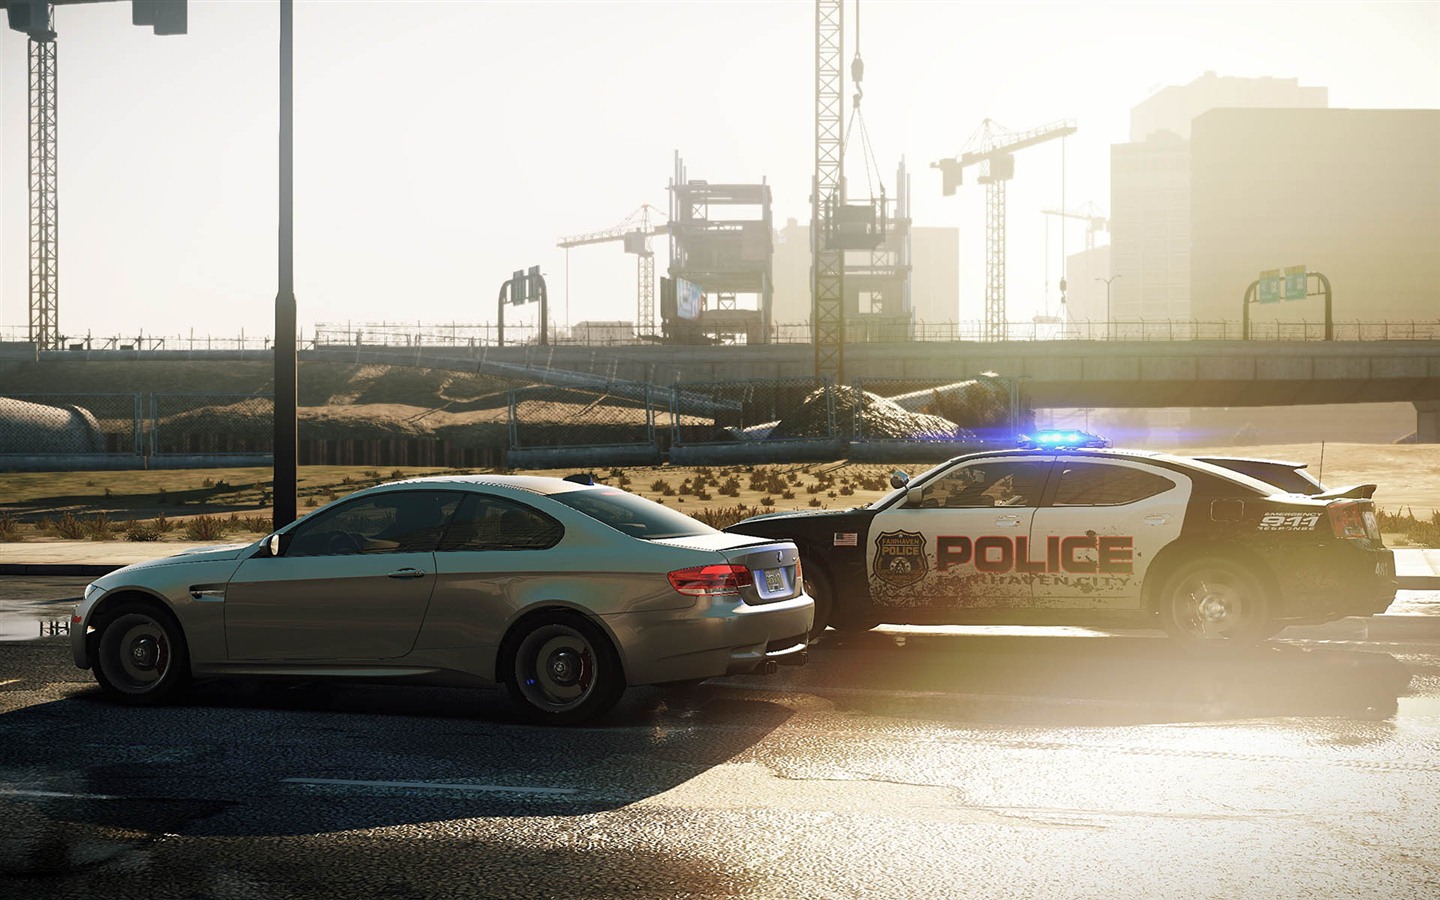 Need for Speed: Most Wanted 极品飞车17：最高通缉 高清壁纸8 - 1440x900